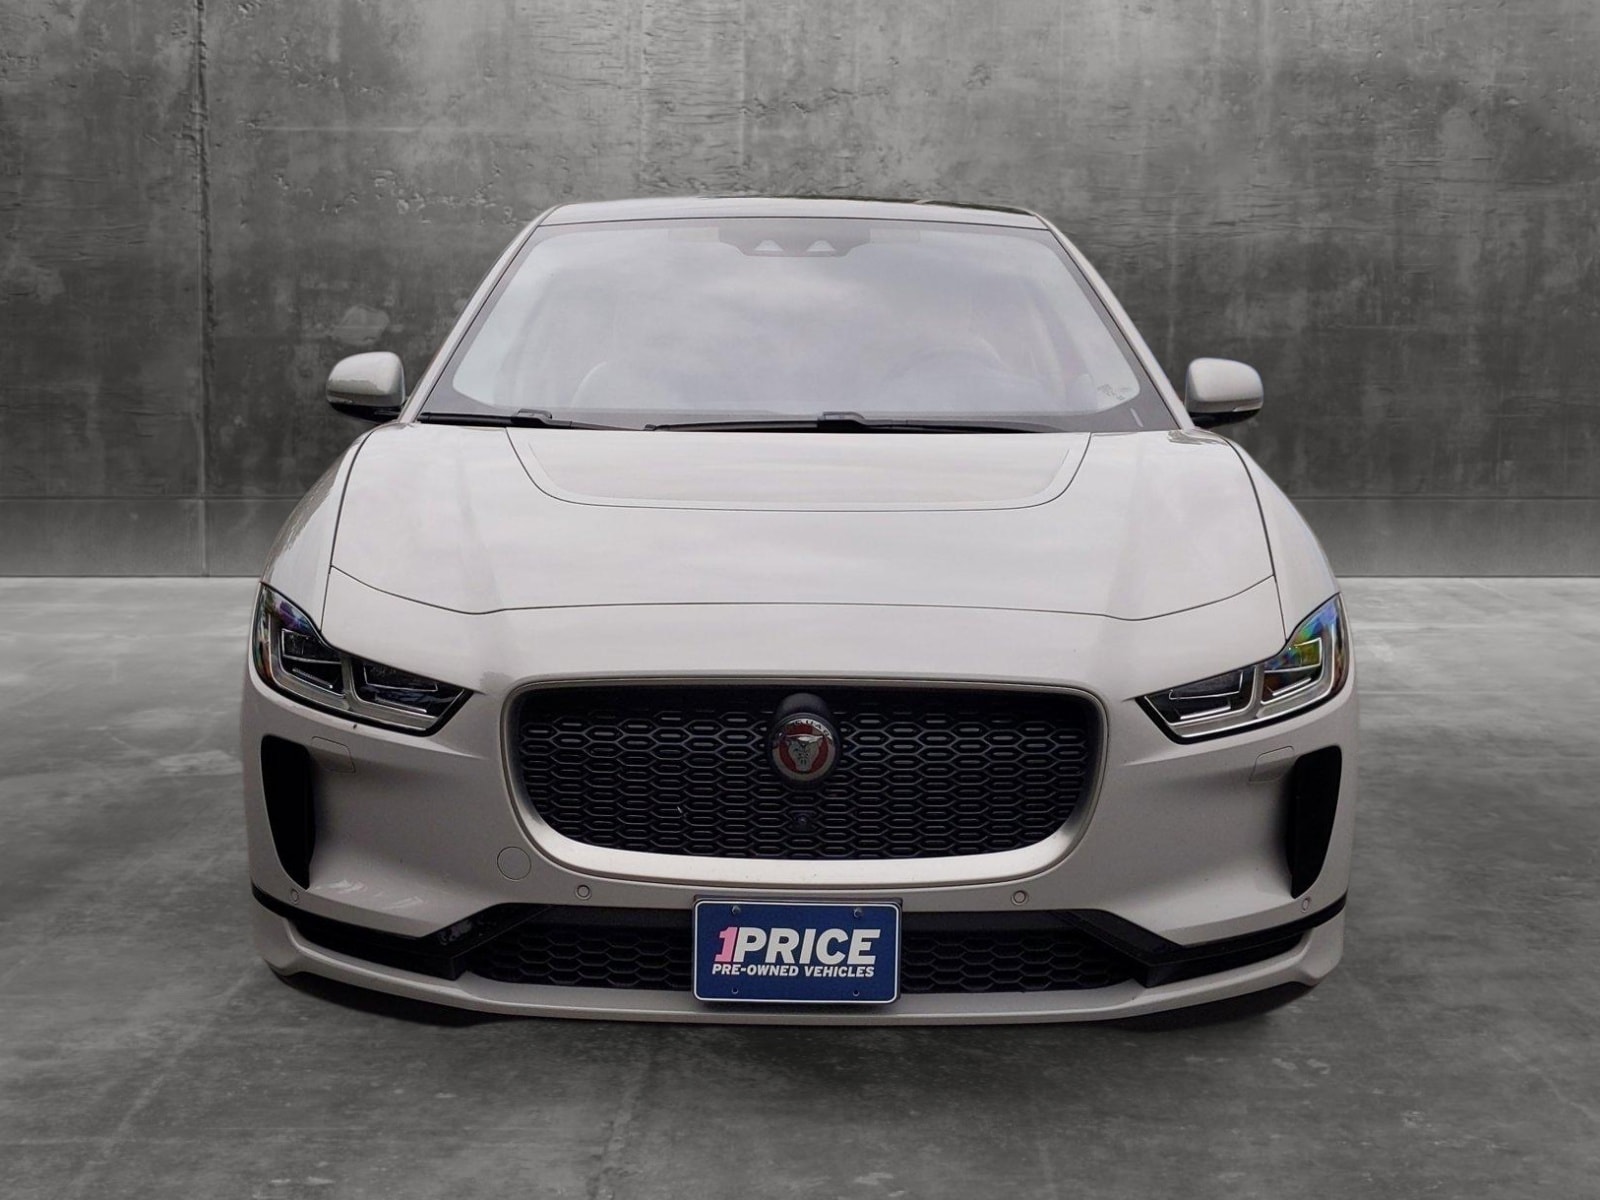 Used 2019 Jaguar I-PACE First Edition with VIN SADHD2S15K1F72601 for sale in Towson, MD